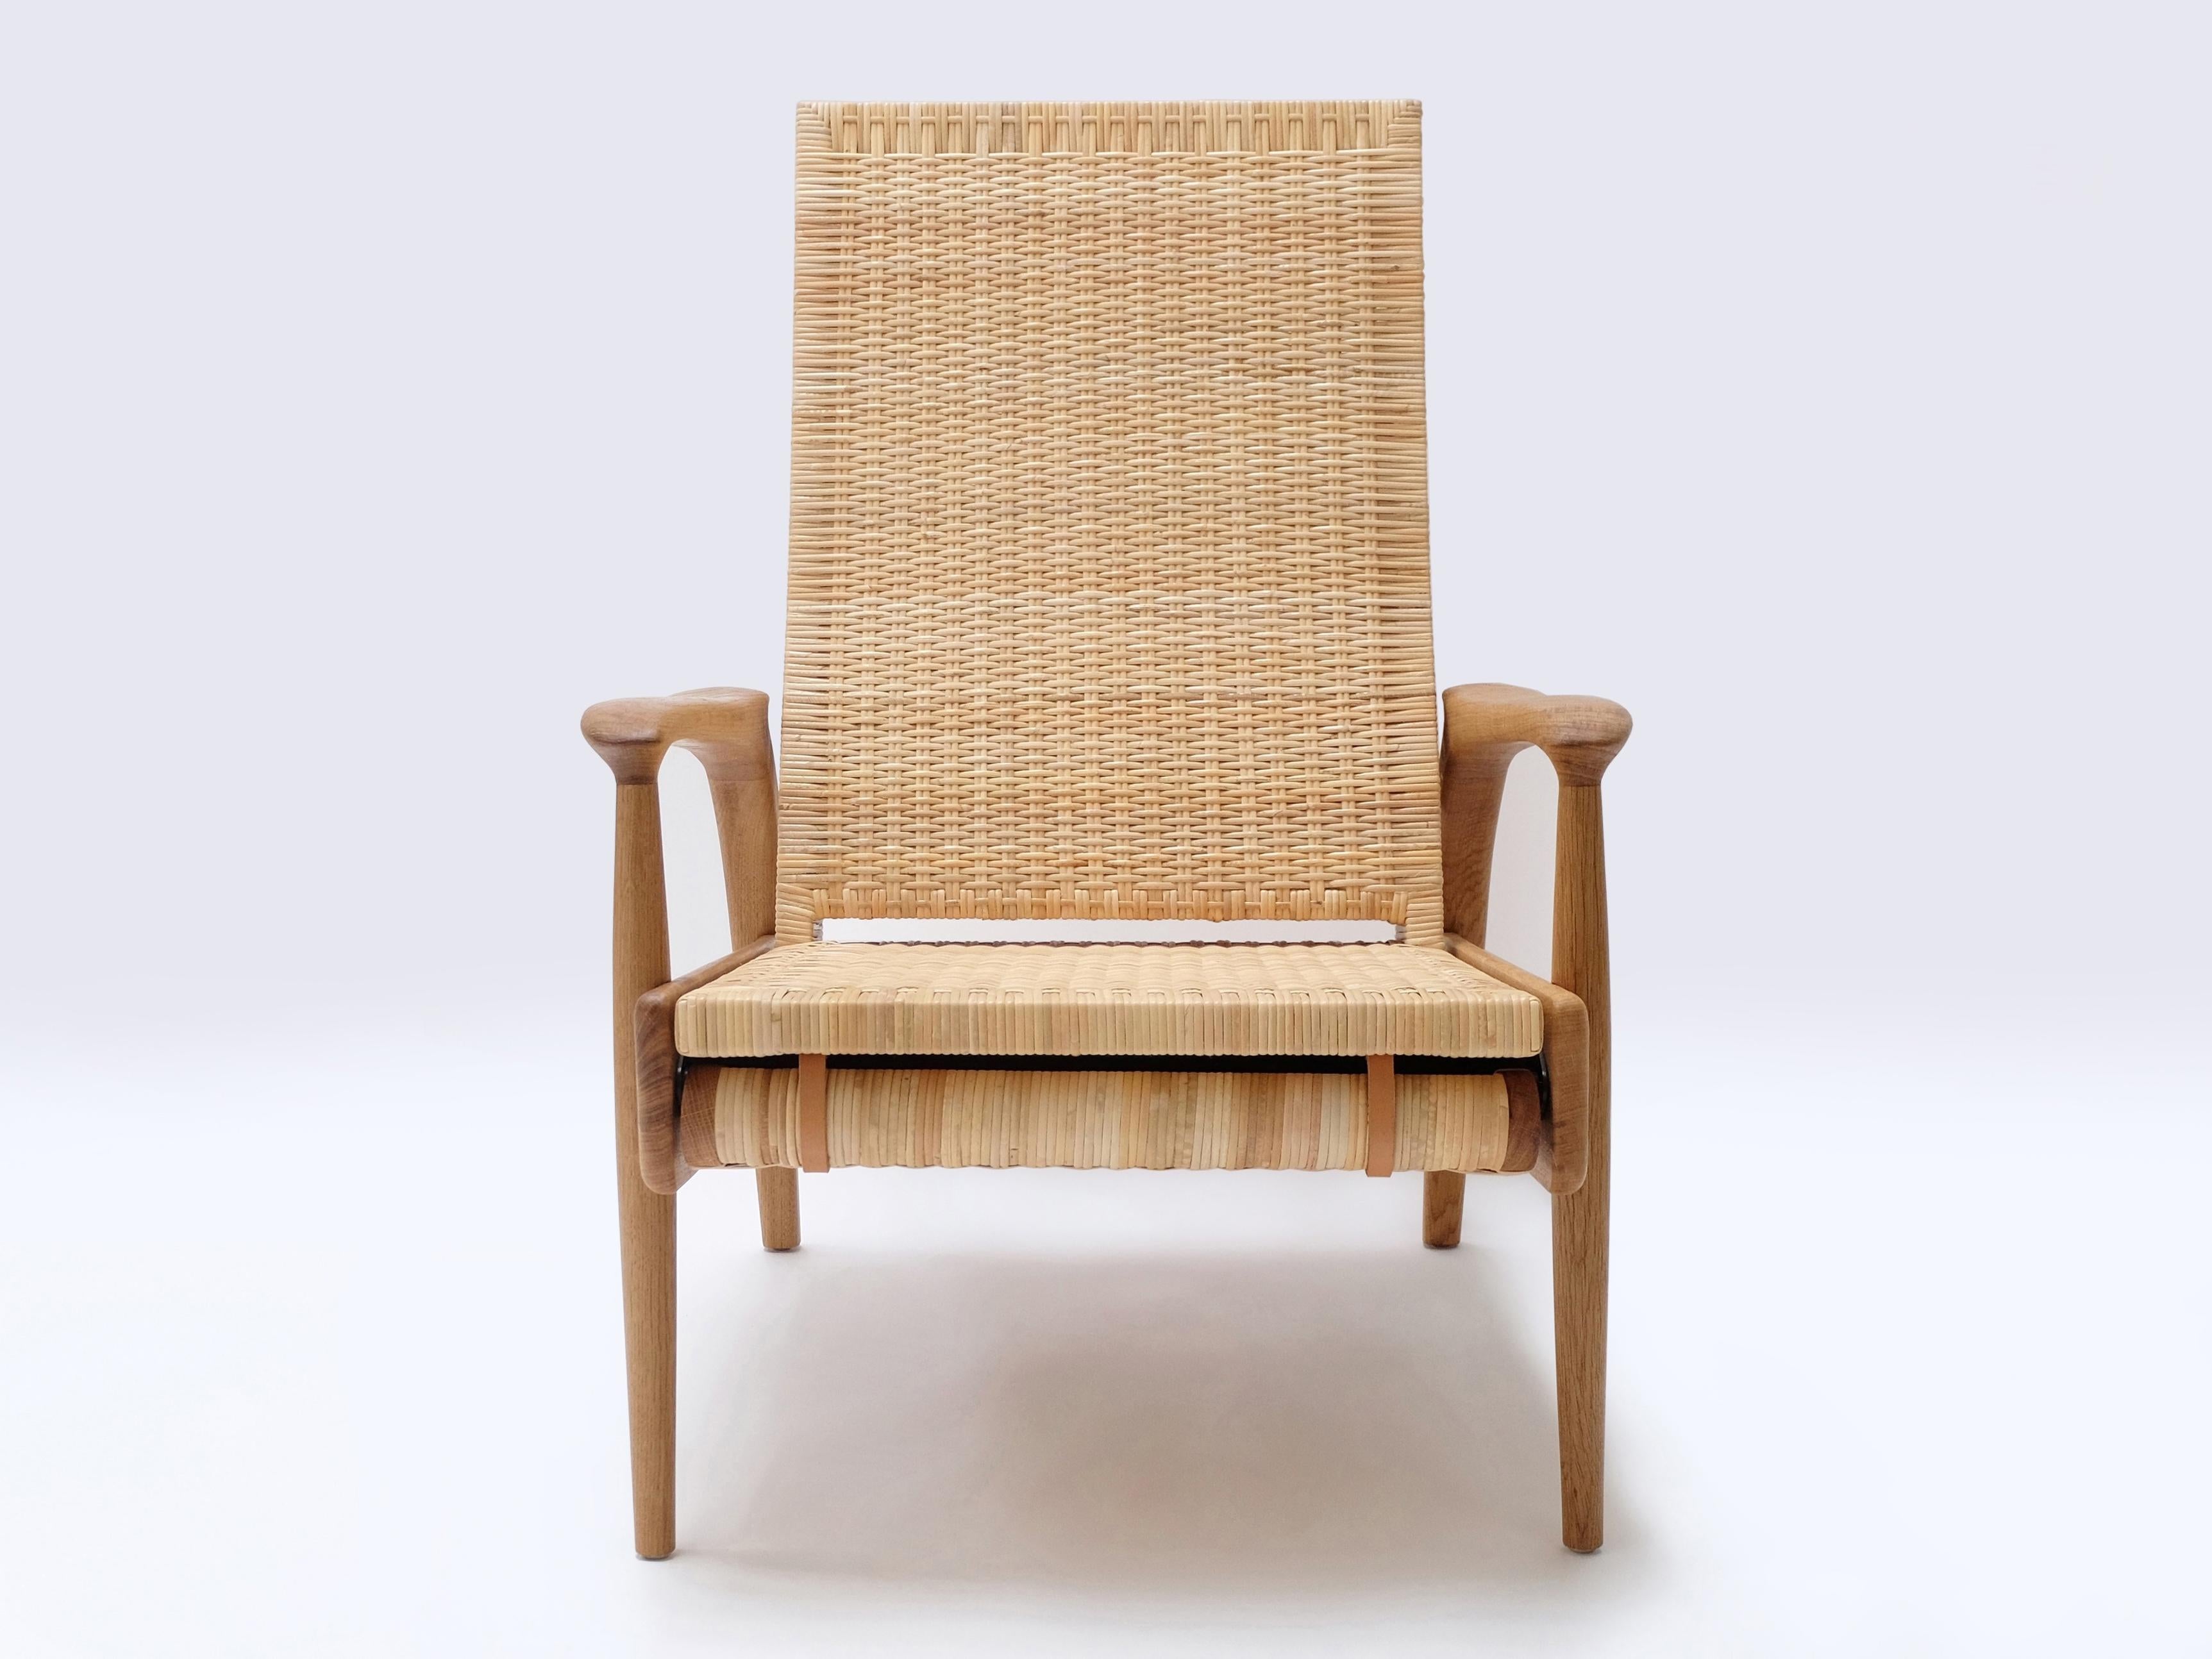 Pair of Custom-Made Handcrafted Reclining Eco Lounge Chairs FENDRIK by Studio180degree
Shown in Sustainable Solid Natural Oiled Oak and Natural Undyed Cane

Noble - Tactile – Refined - Sustainable
Reclining Eco Lounge Chair FENDRIK is a noble Eco